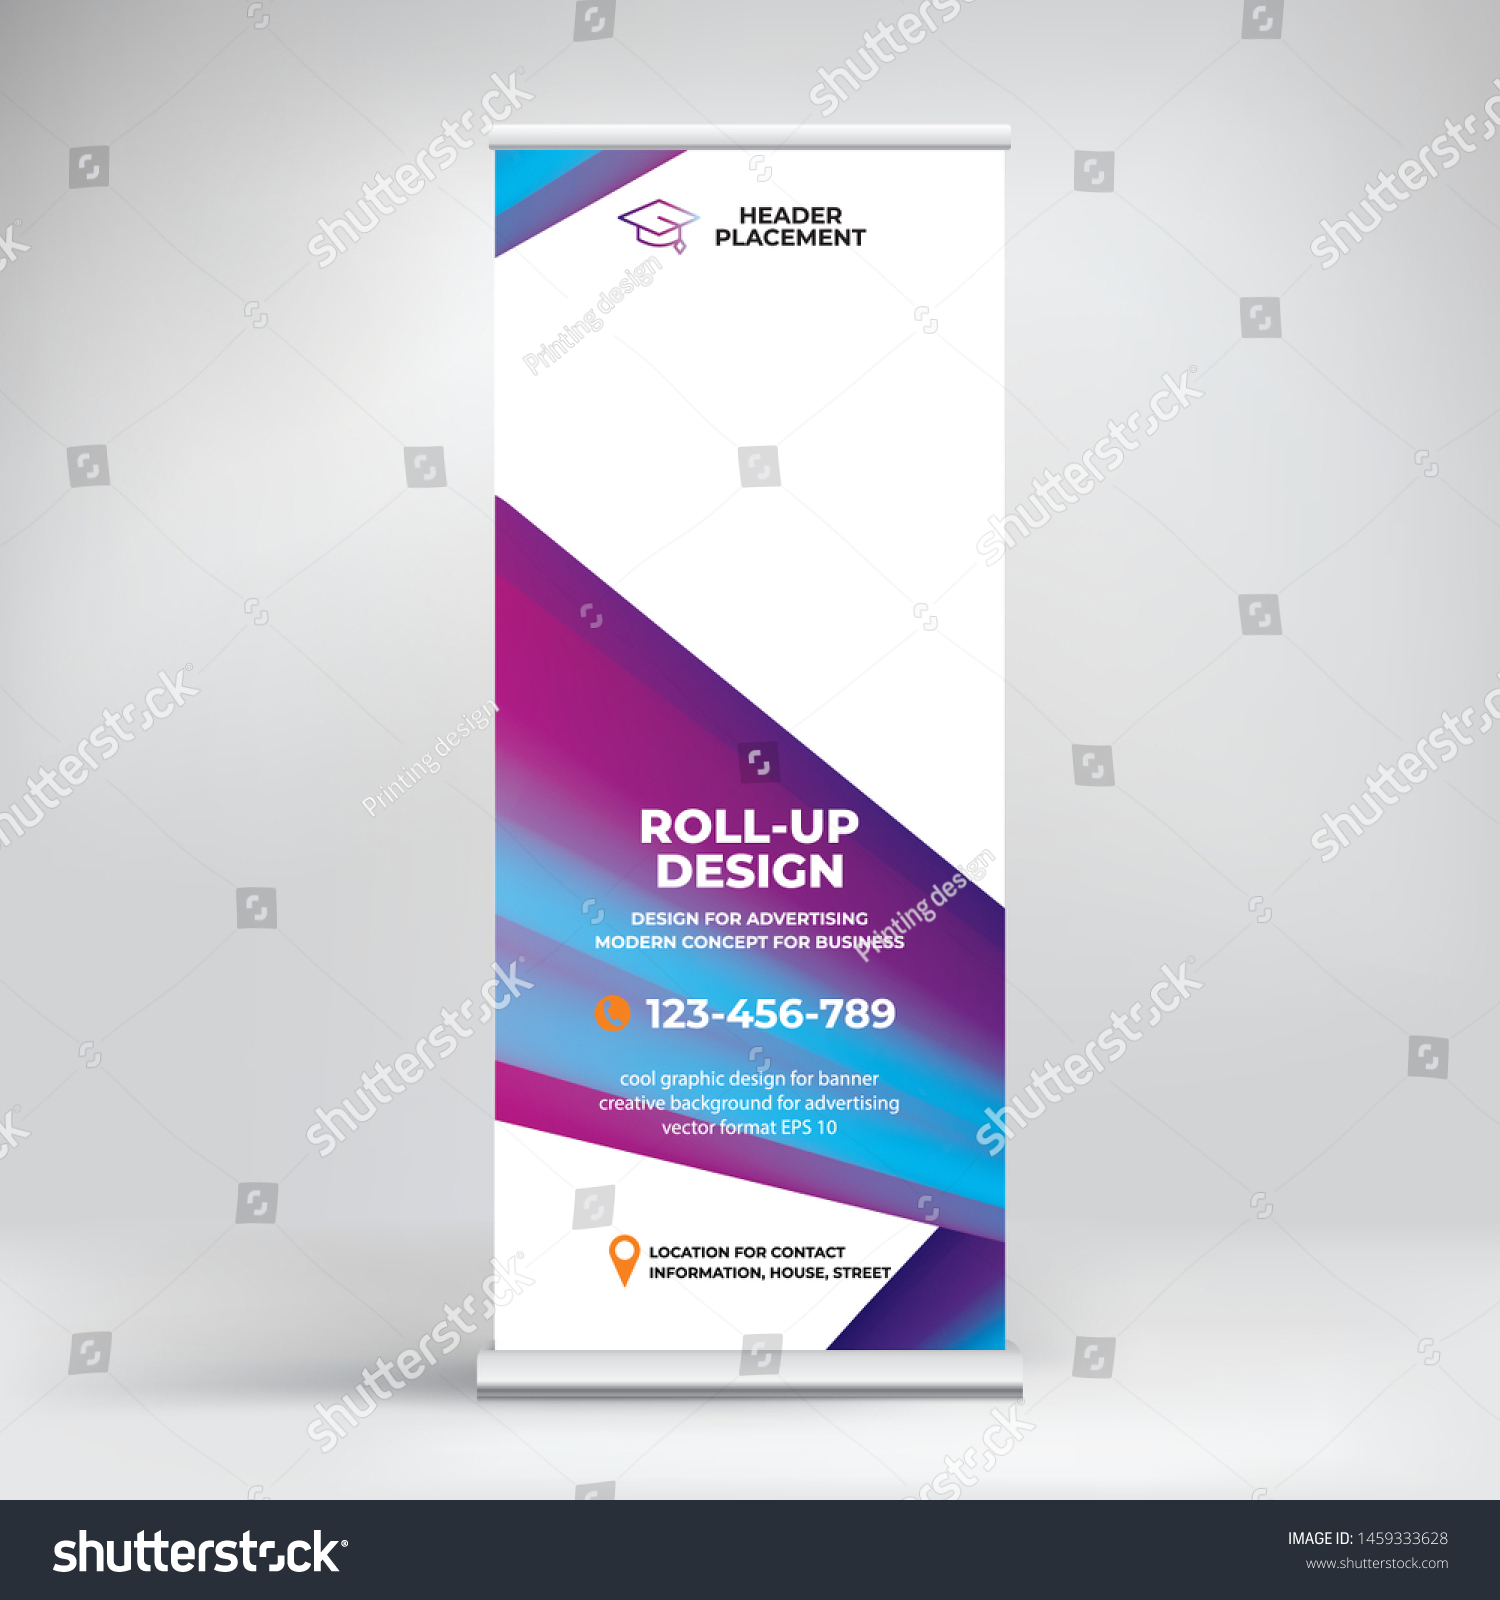 Banner Design Rollup Stand Advertising Conferences Stock Vector Royalty Free